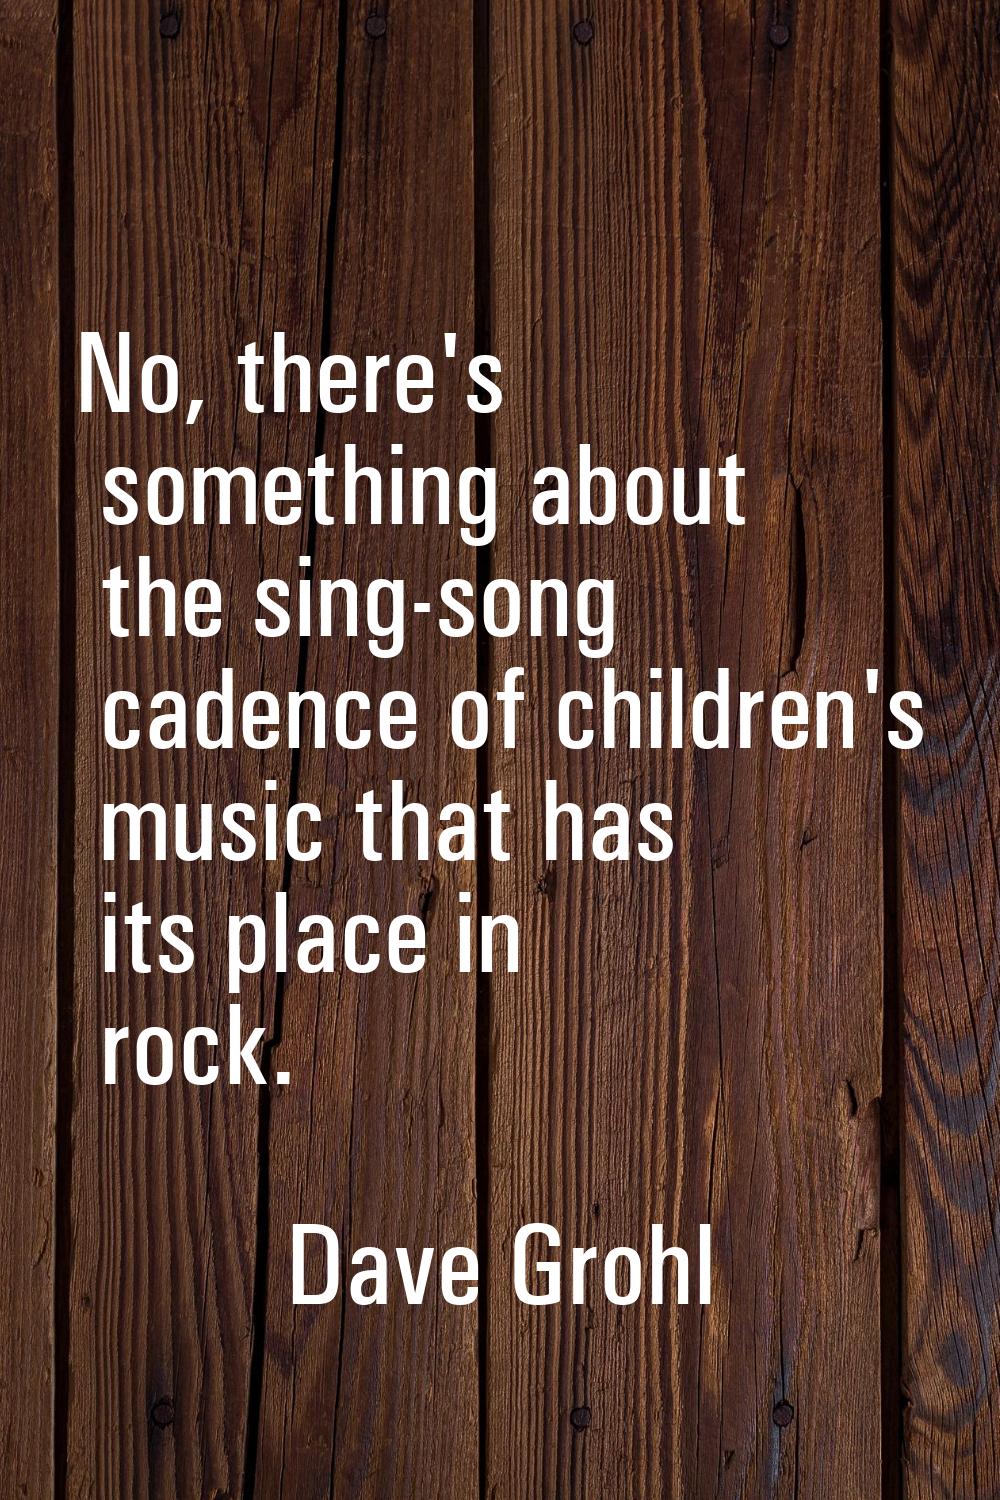 No, there's something about the sing-song cadence of children's music that has its place in rock.